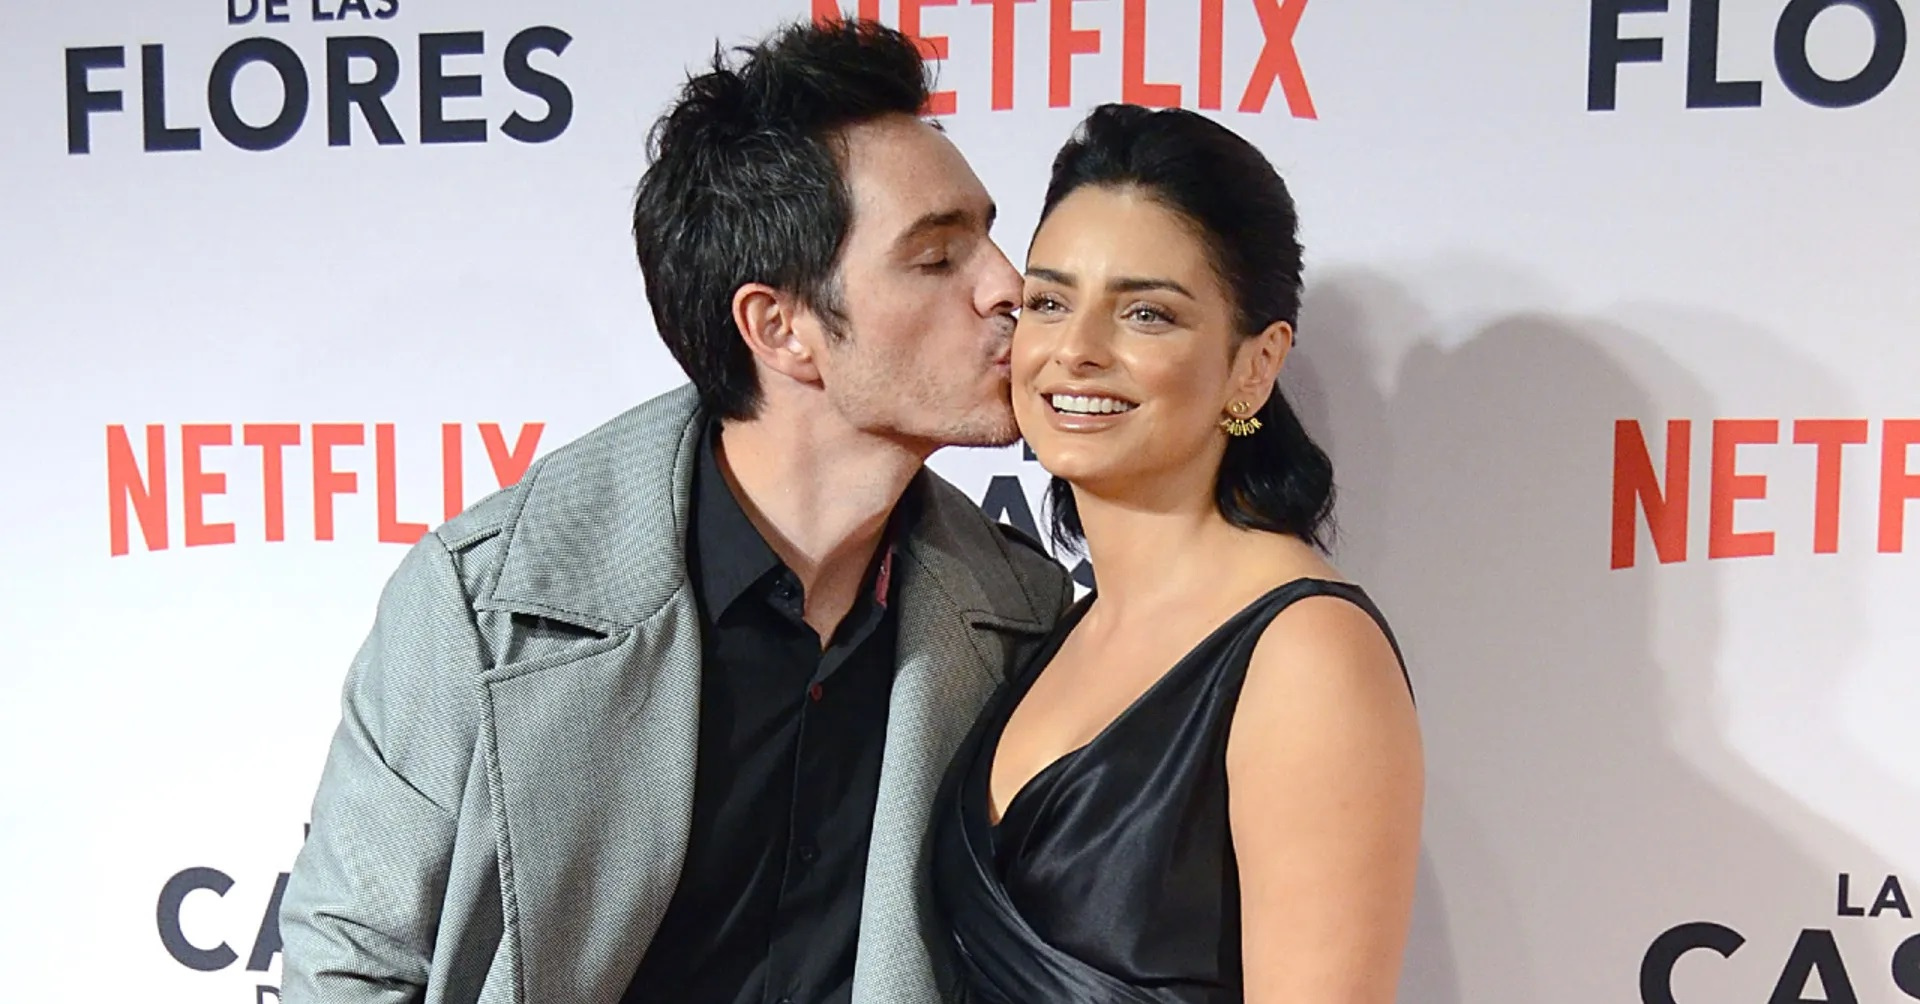 Aislinn Derbez opens up about her supposed reconciliation with Mauricio Ochmann